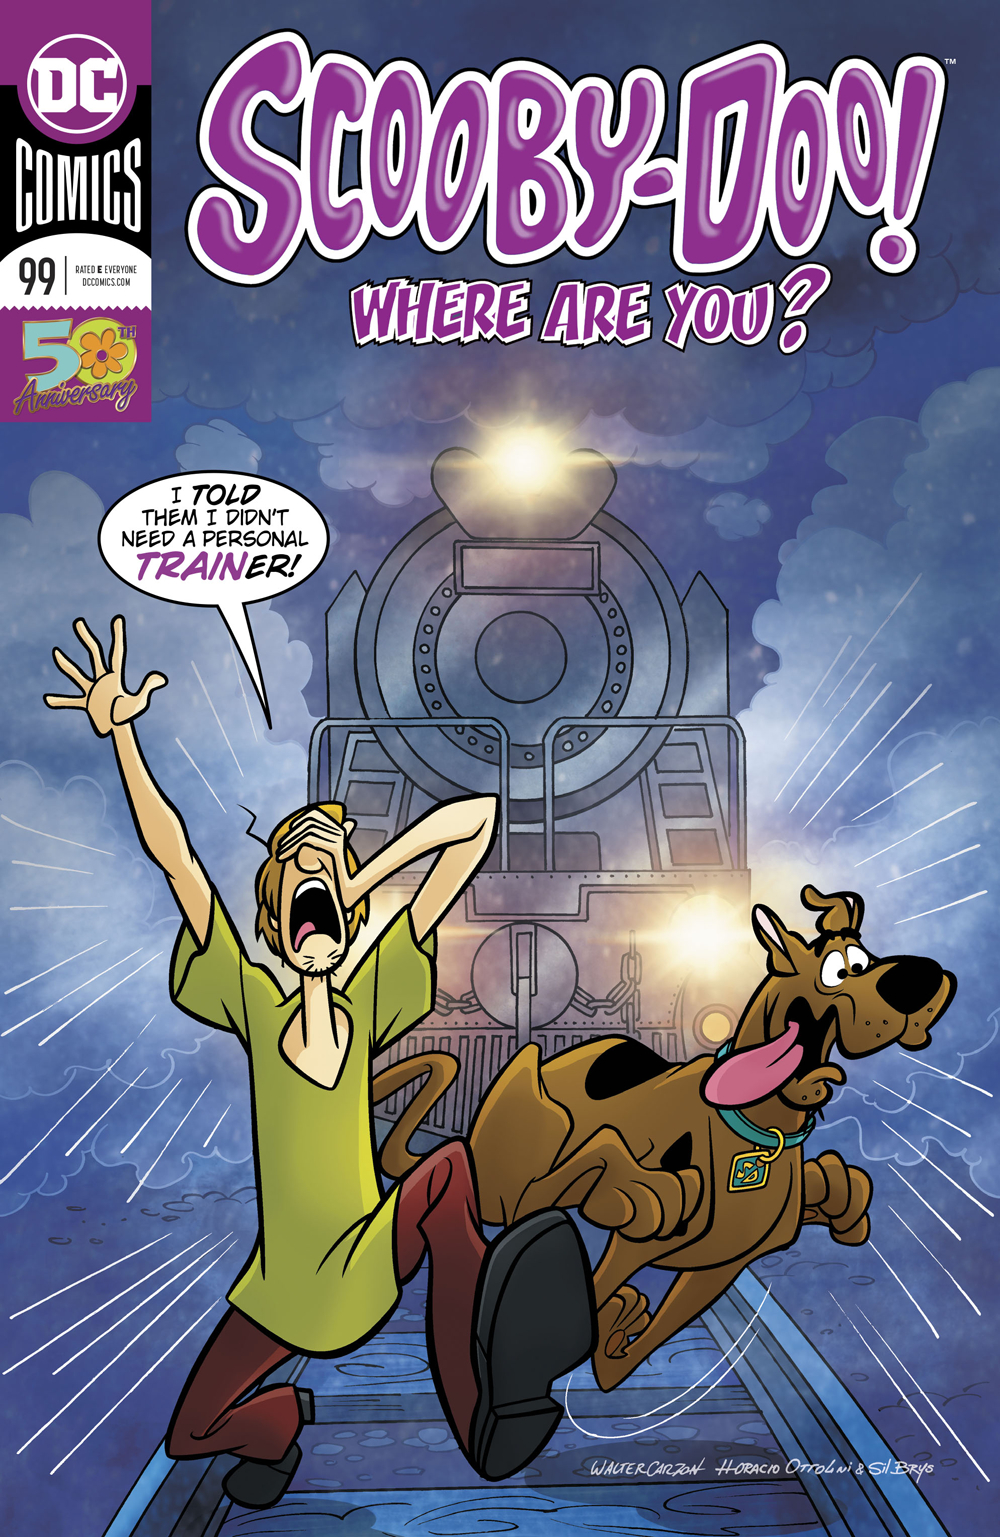 Scooby-Doo Where Are You? no. 99 (2010 Series)